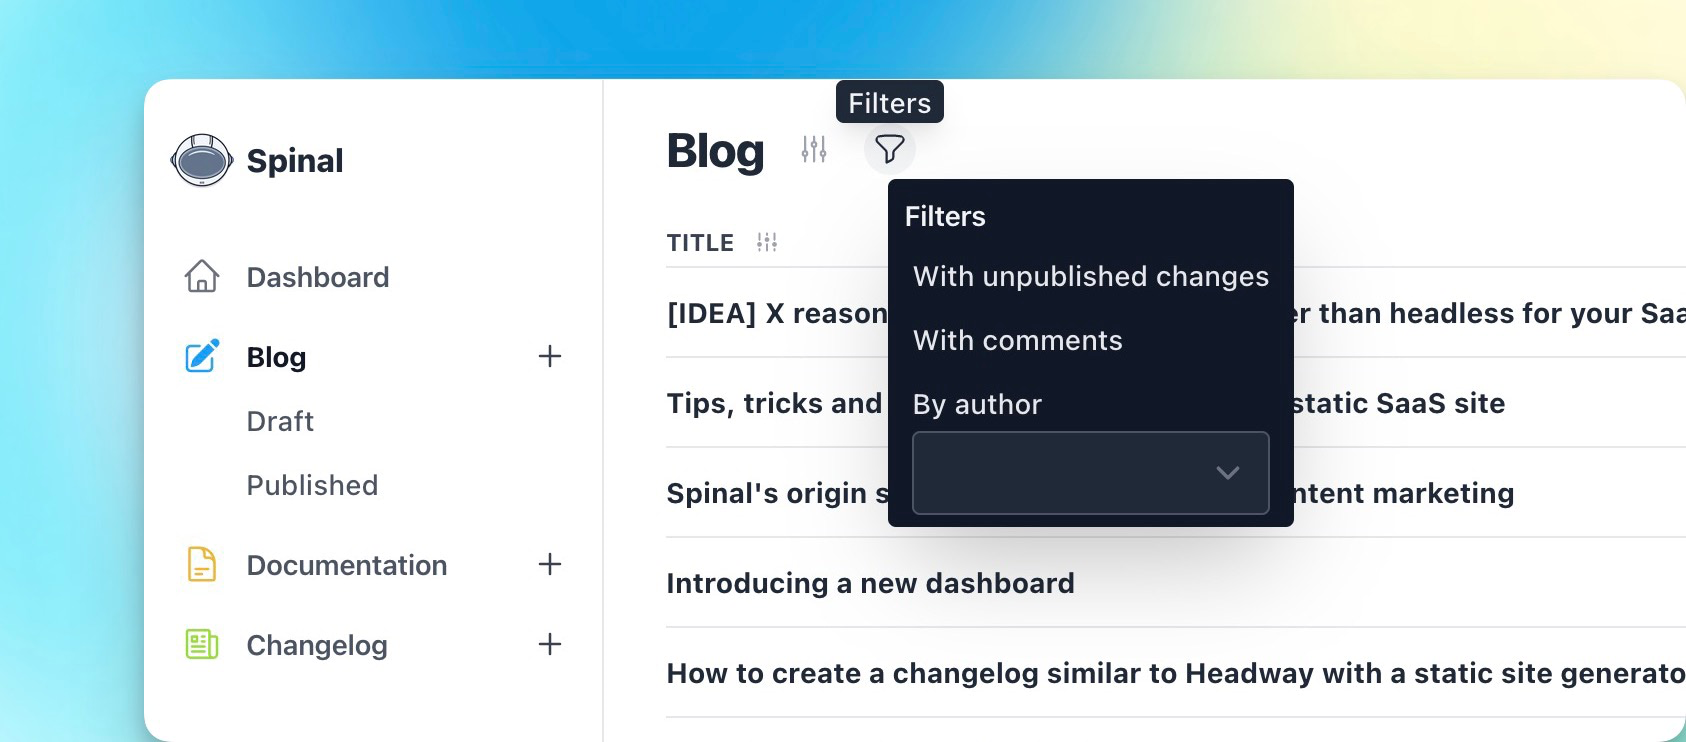 Preview of the content filter dropdown, showing the options: "with unpublished changes", "with comments" and by "authors" with a select field below it